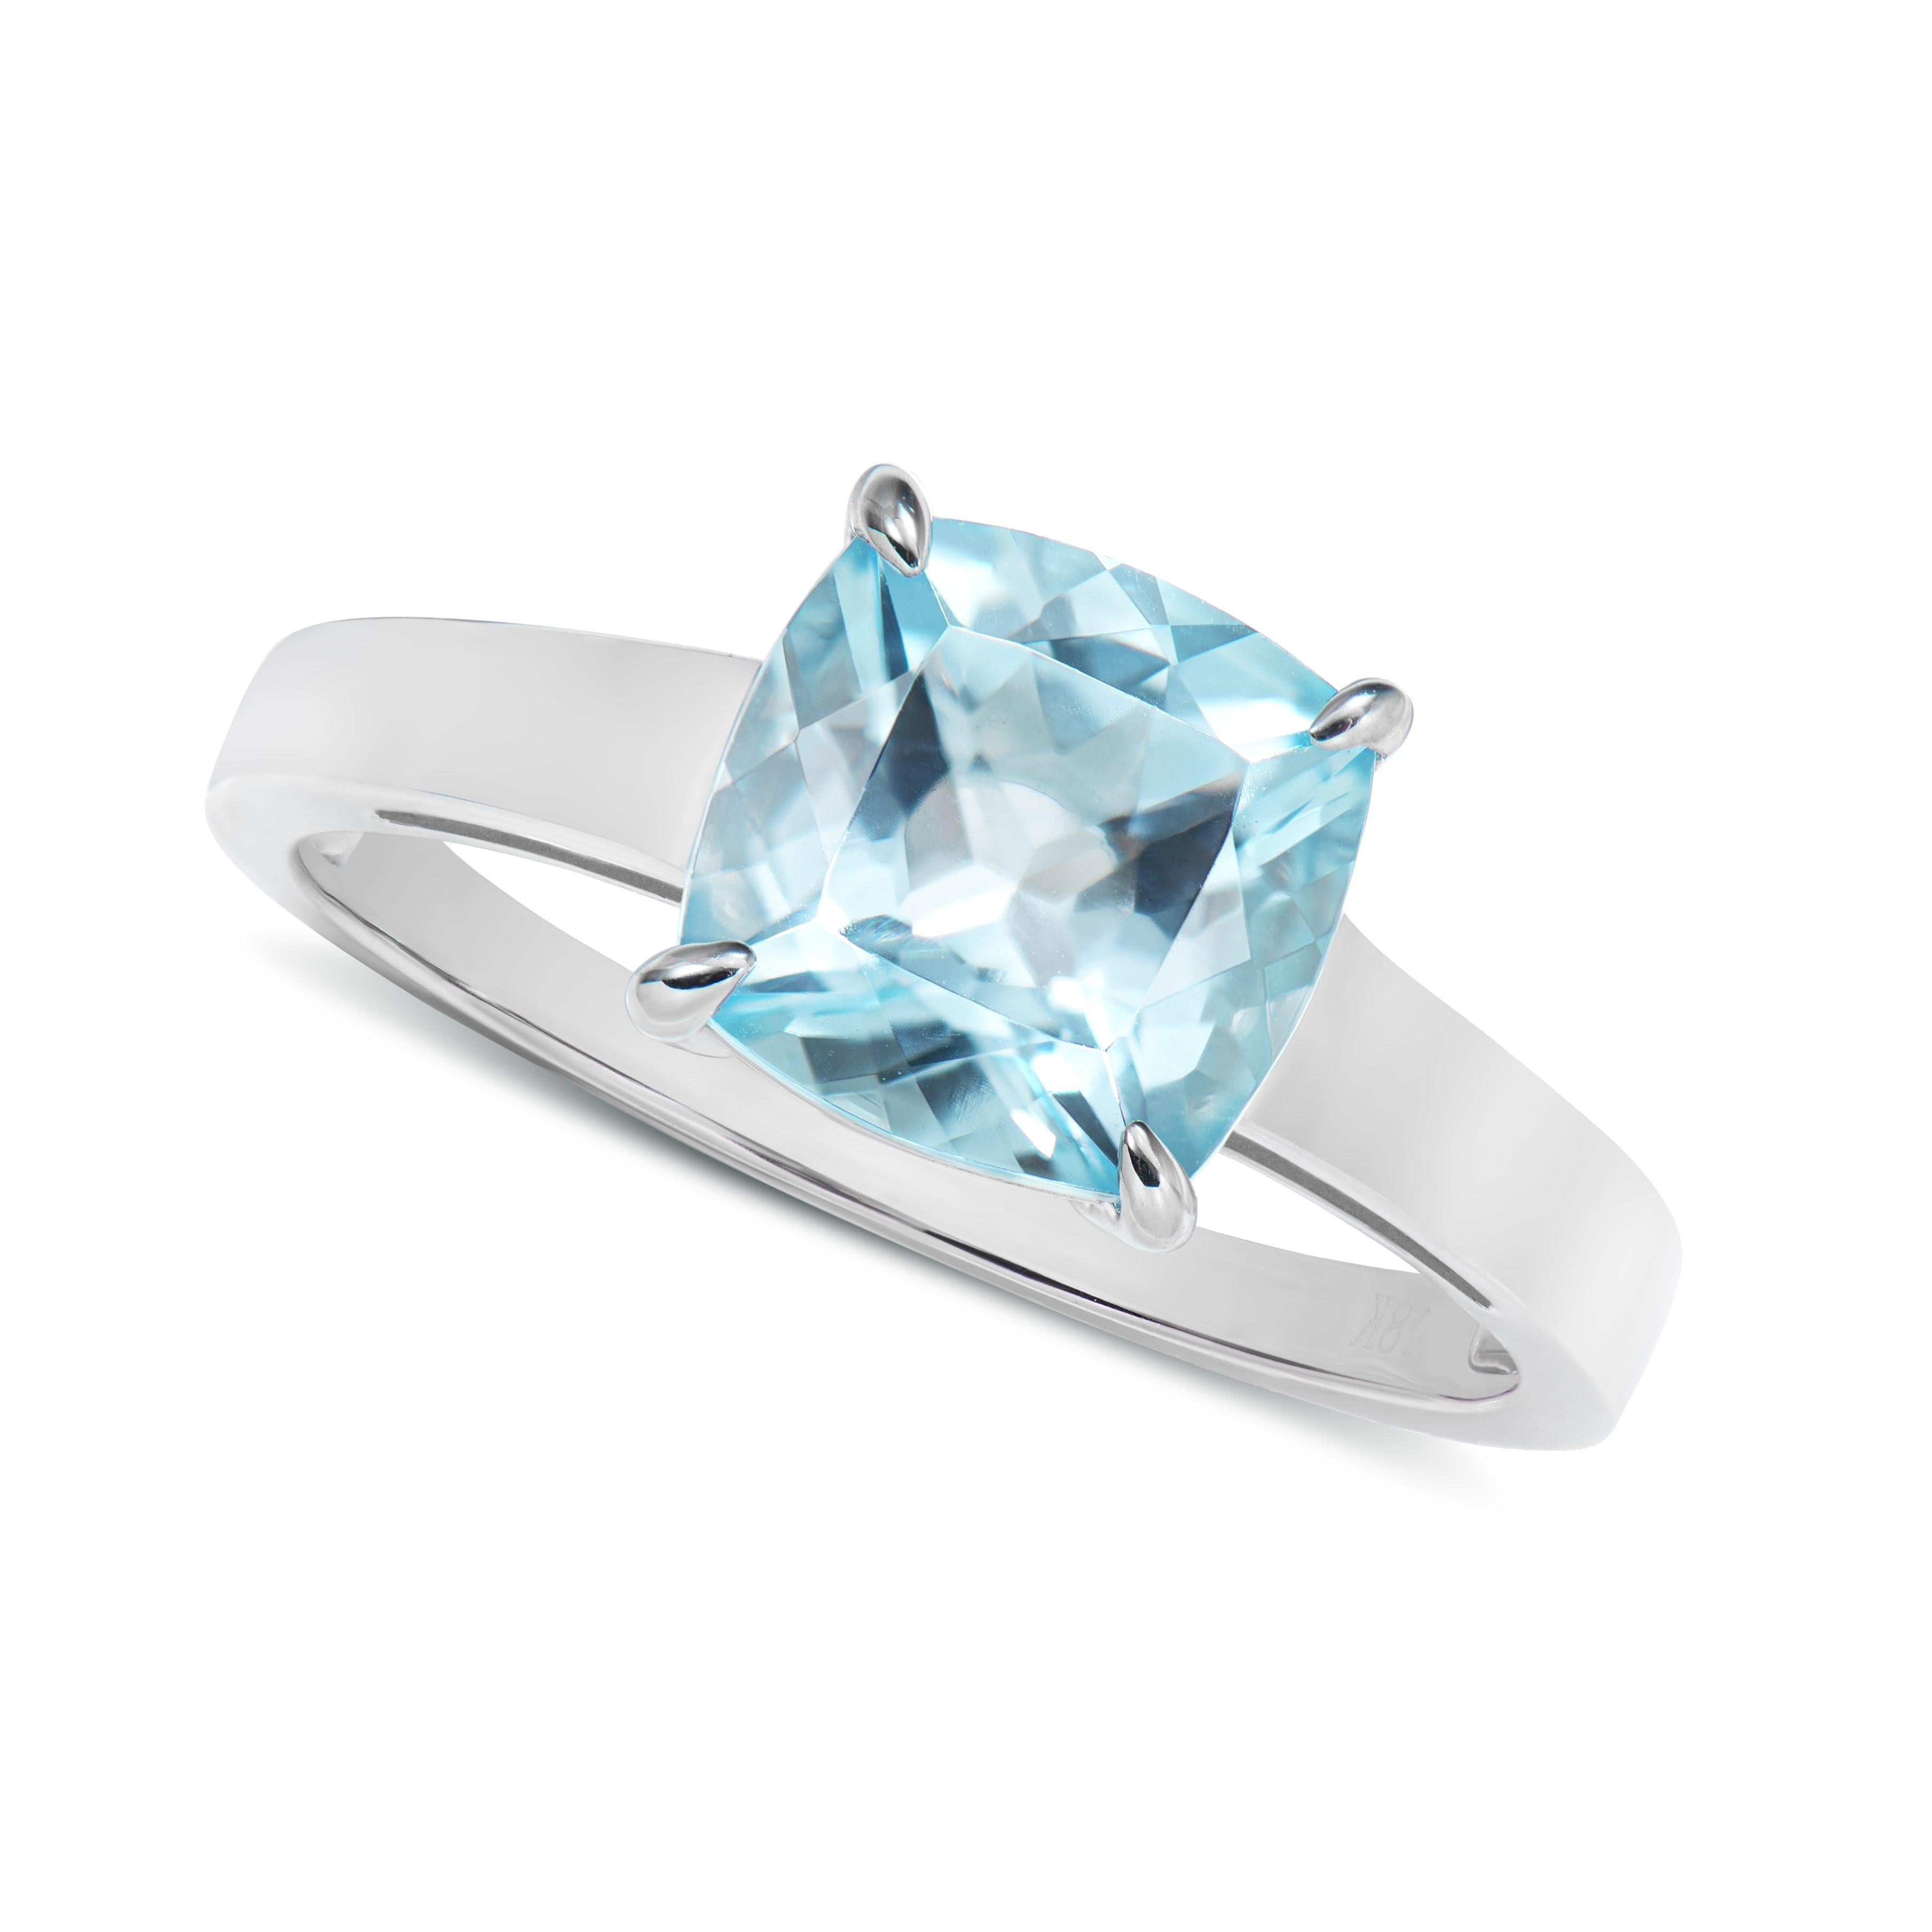 Contemporary 2.70 Carat Swiss Blue Topaz Fancy Ring in 18Karat White Gold. For Sale